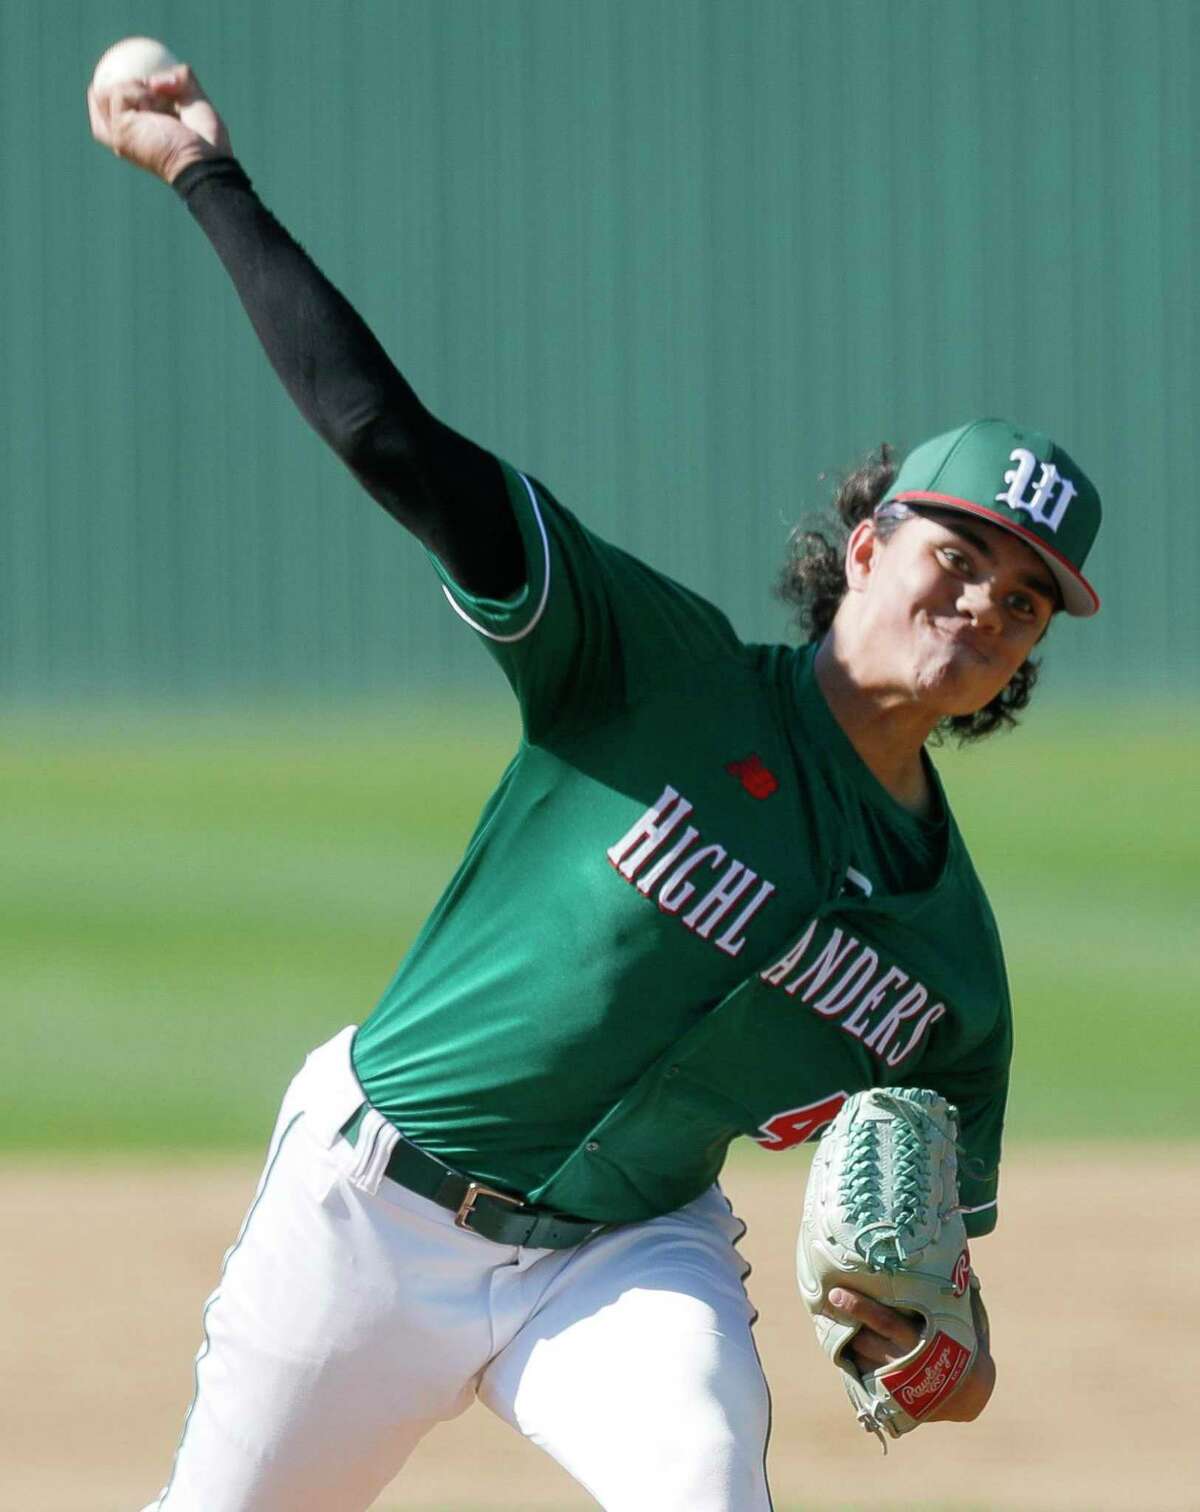 The Woodlands pitcher Ethan Coronel (4), shown here last week, pitched a complete-game shutout Friday against College Park.